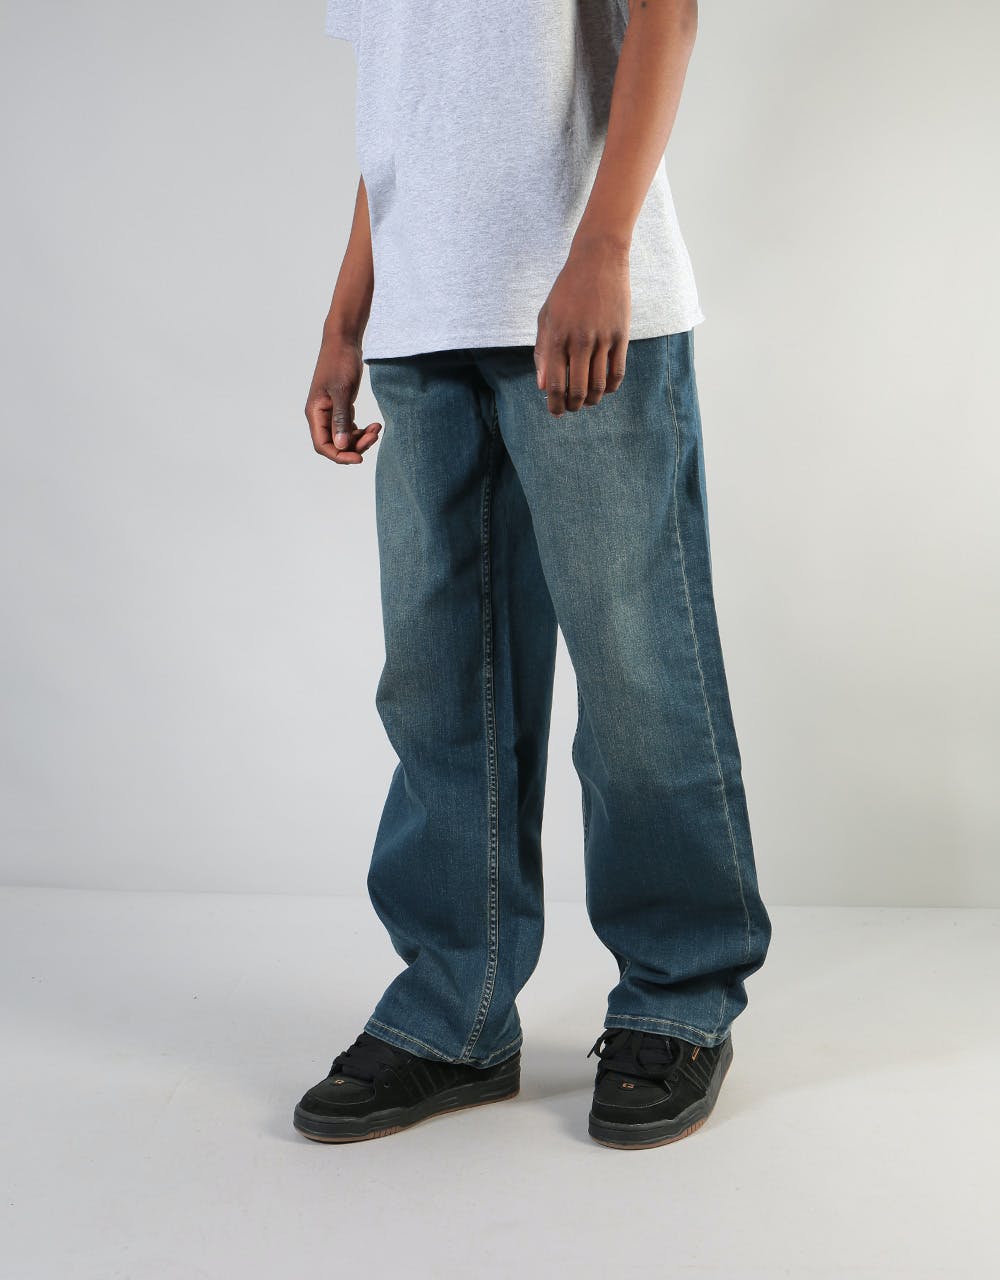 Baggy Clothing. Top 10 Outdated Fashion and Clothing Trends to Avoid - 10